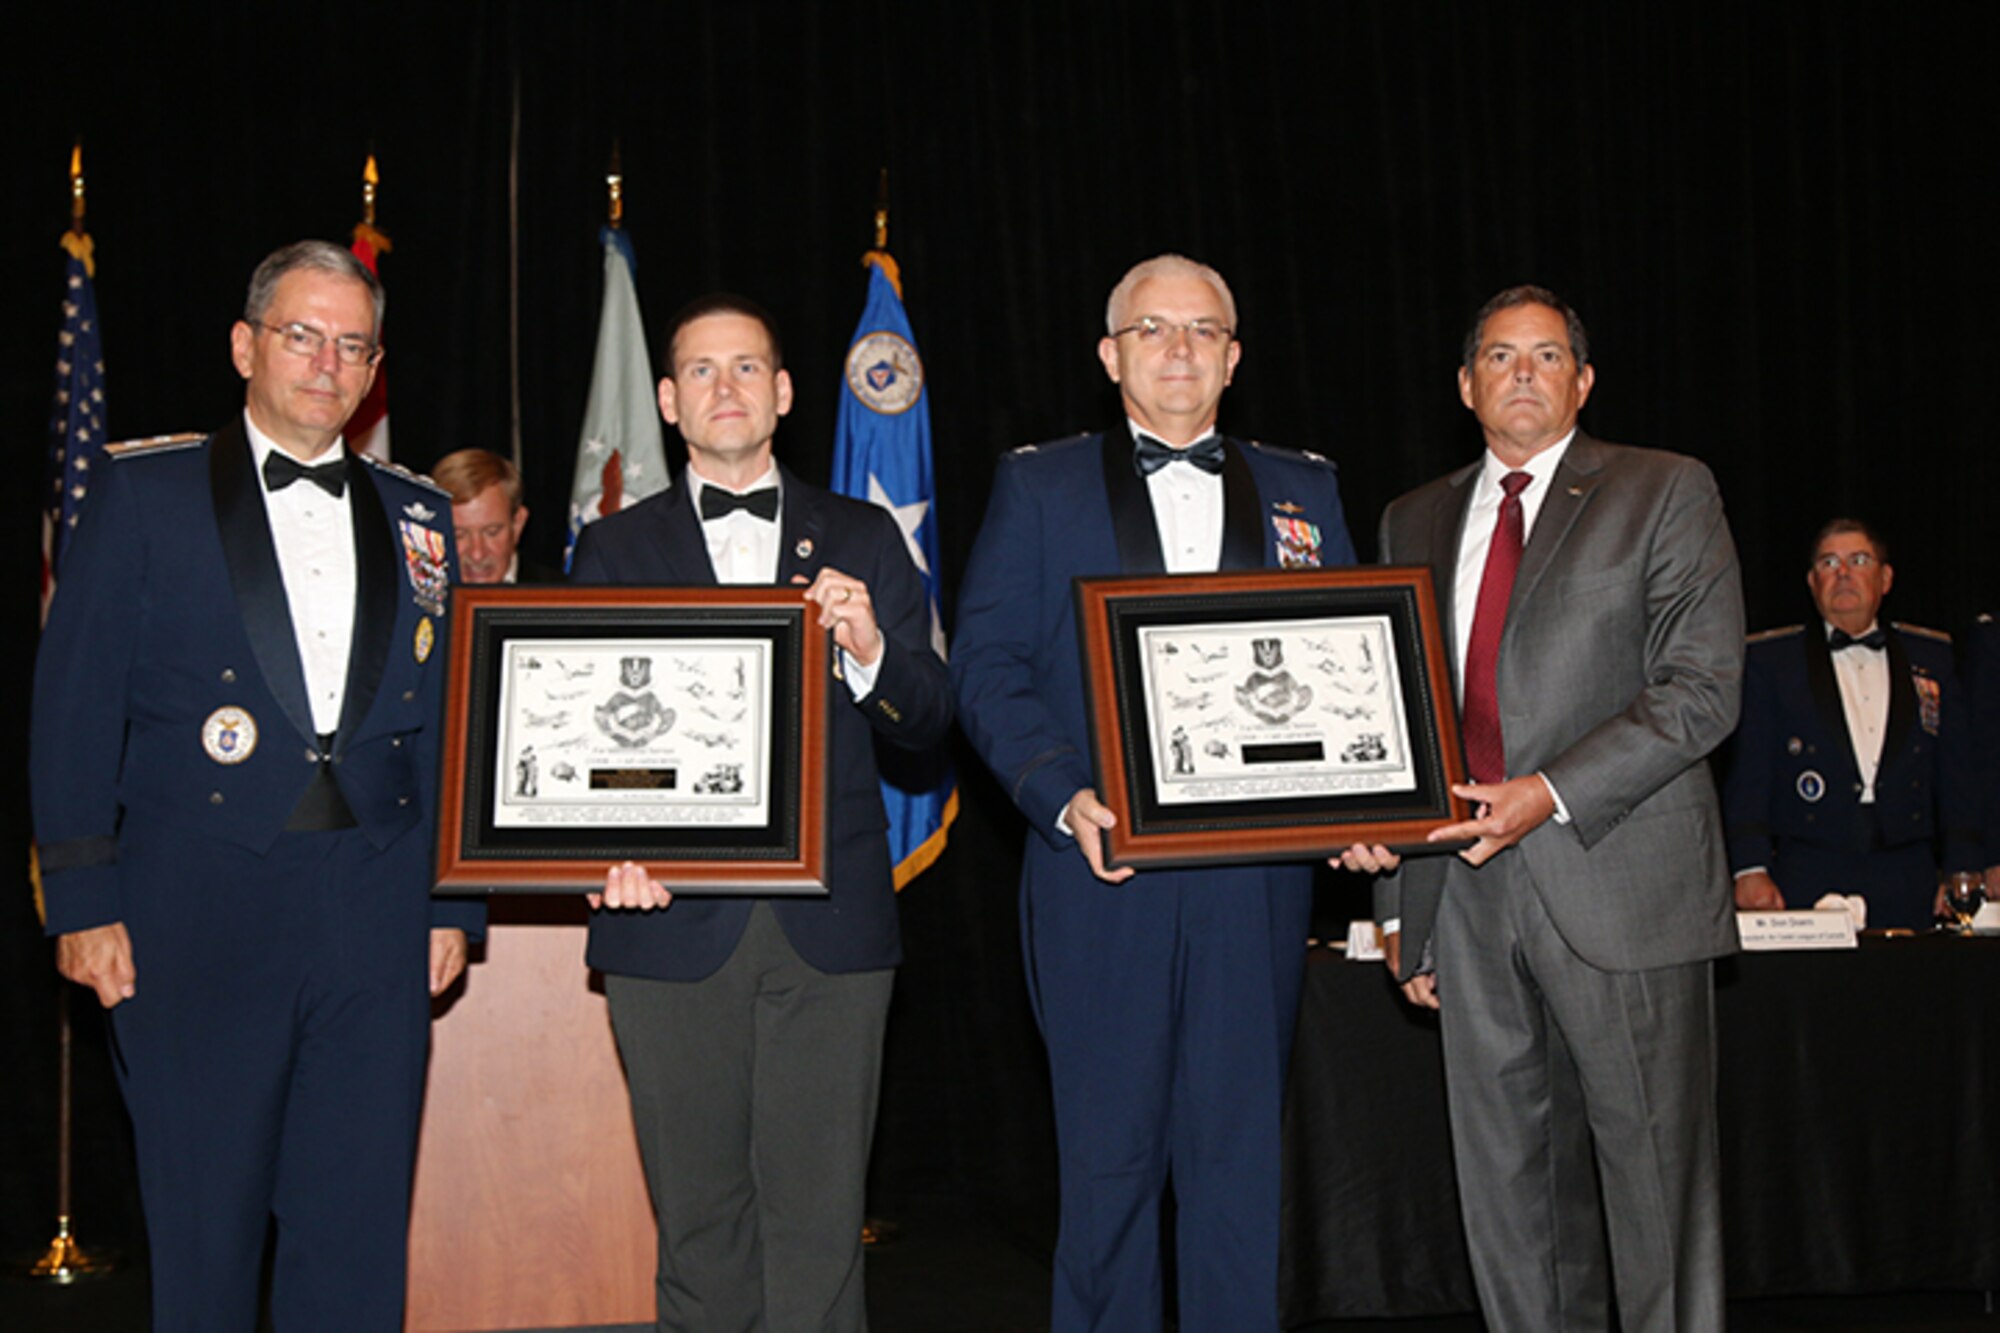 Maj. Gen. Joe Vazquez, Civil Air Patrol National Commander,  flanks CAP members Maj. Justin Ogden and Col. Brian Ready, along with John Griffin, 1st Air Force (Air Forces Northern) Chief of Staff, during the Civil Air Patrol annual awards ceremony Aug. 29.  Ogden and Ready received the 2014 AFNORTH Commander's Award for their work on CAP's Cell Phone Forensics Team. (Photo Released by Susan Schneider/CAP National Headquarters)